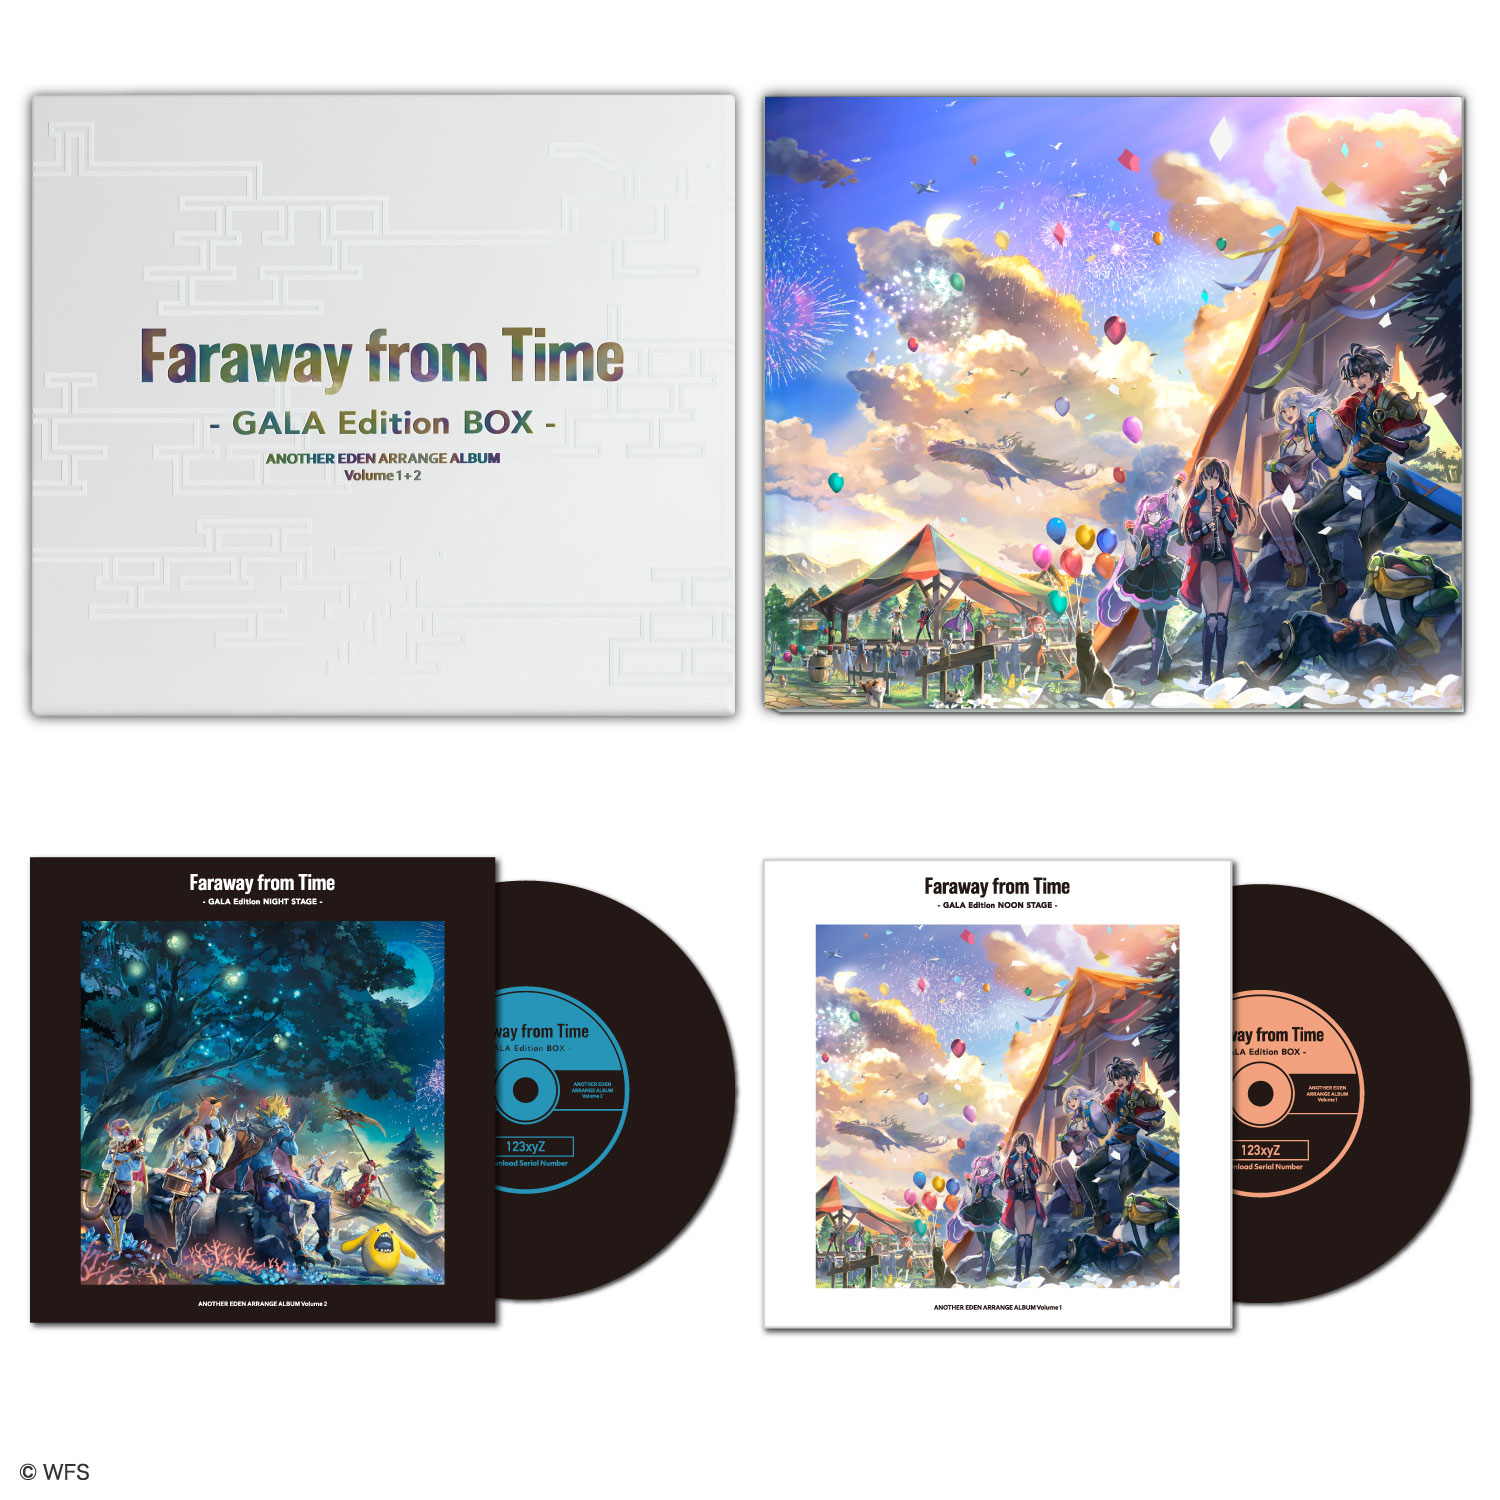 Faraway from Time - GALA Edition BOX -